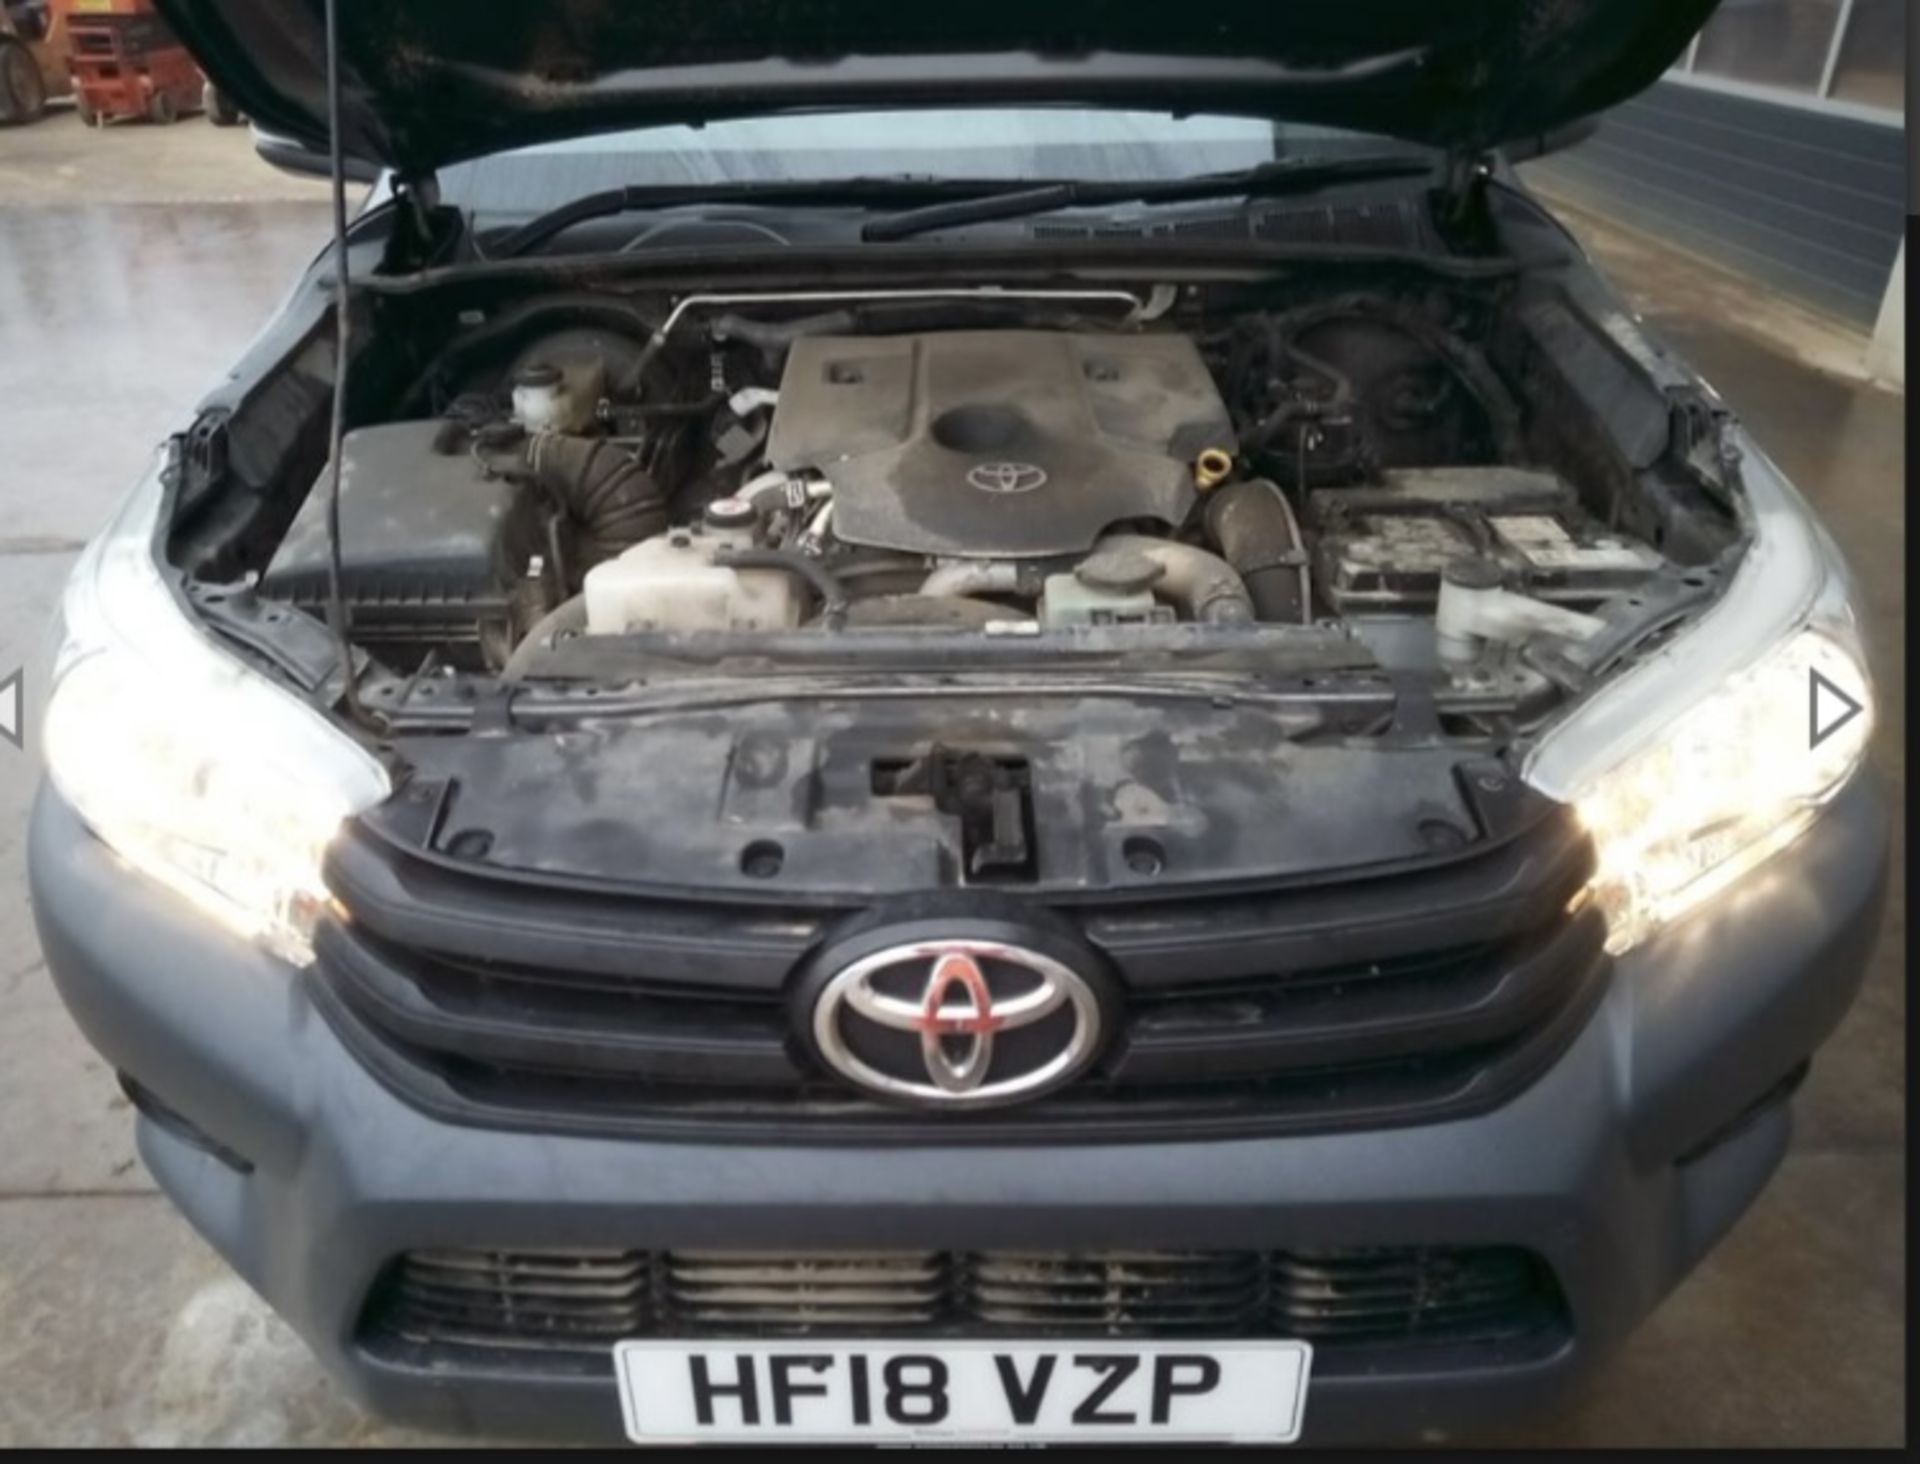 2018 TOYOTA HILUX 2018 2.4D -4WD ACTIVE 6 LOCATION NORTH YORKSHIRE - Image 11 of 15